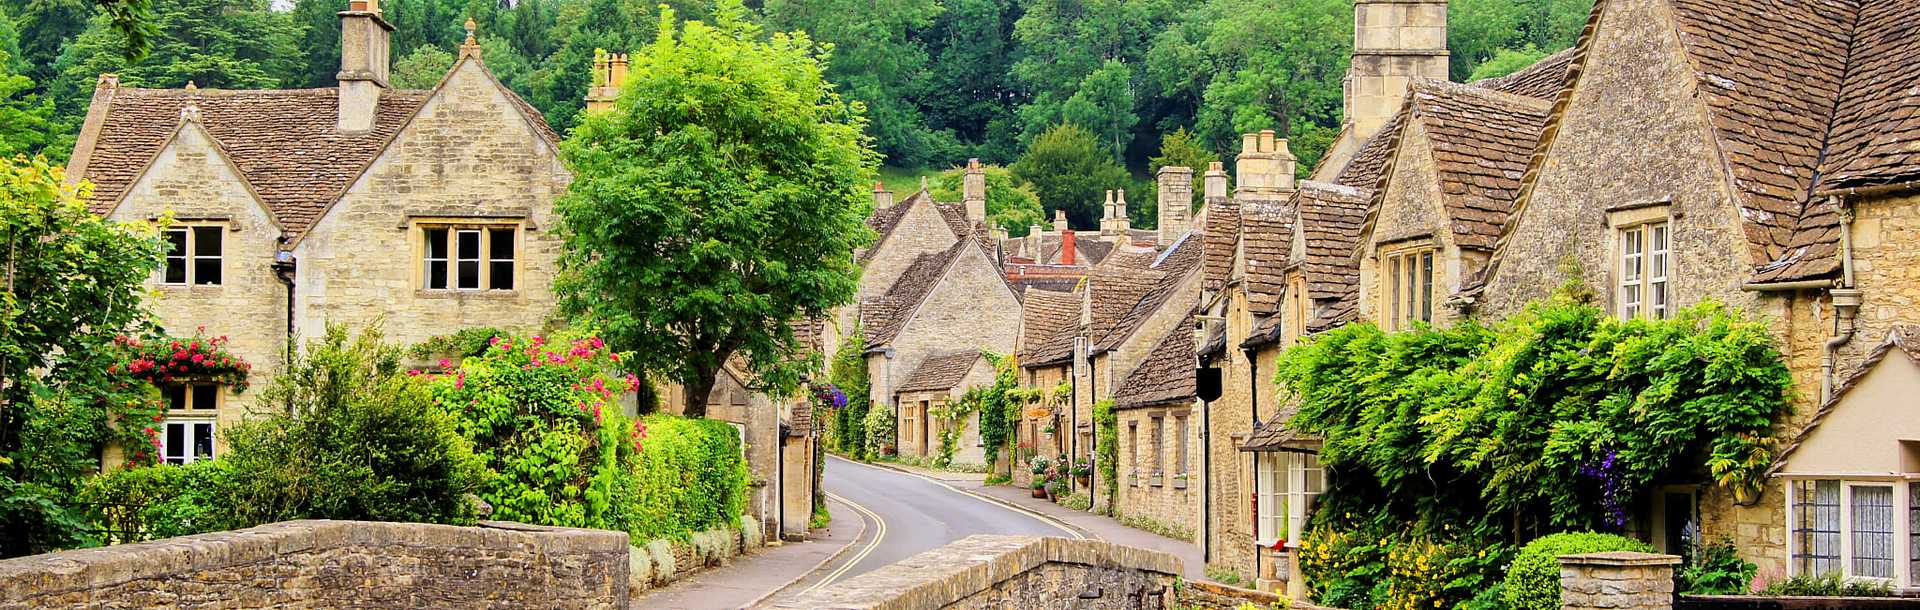 Cotswold village of Castle Combe, England